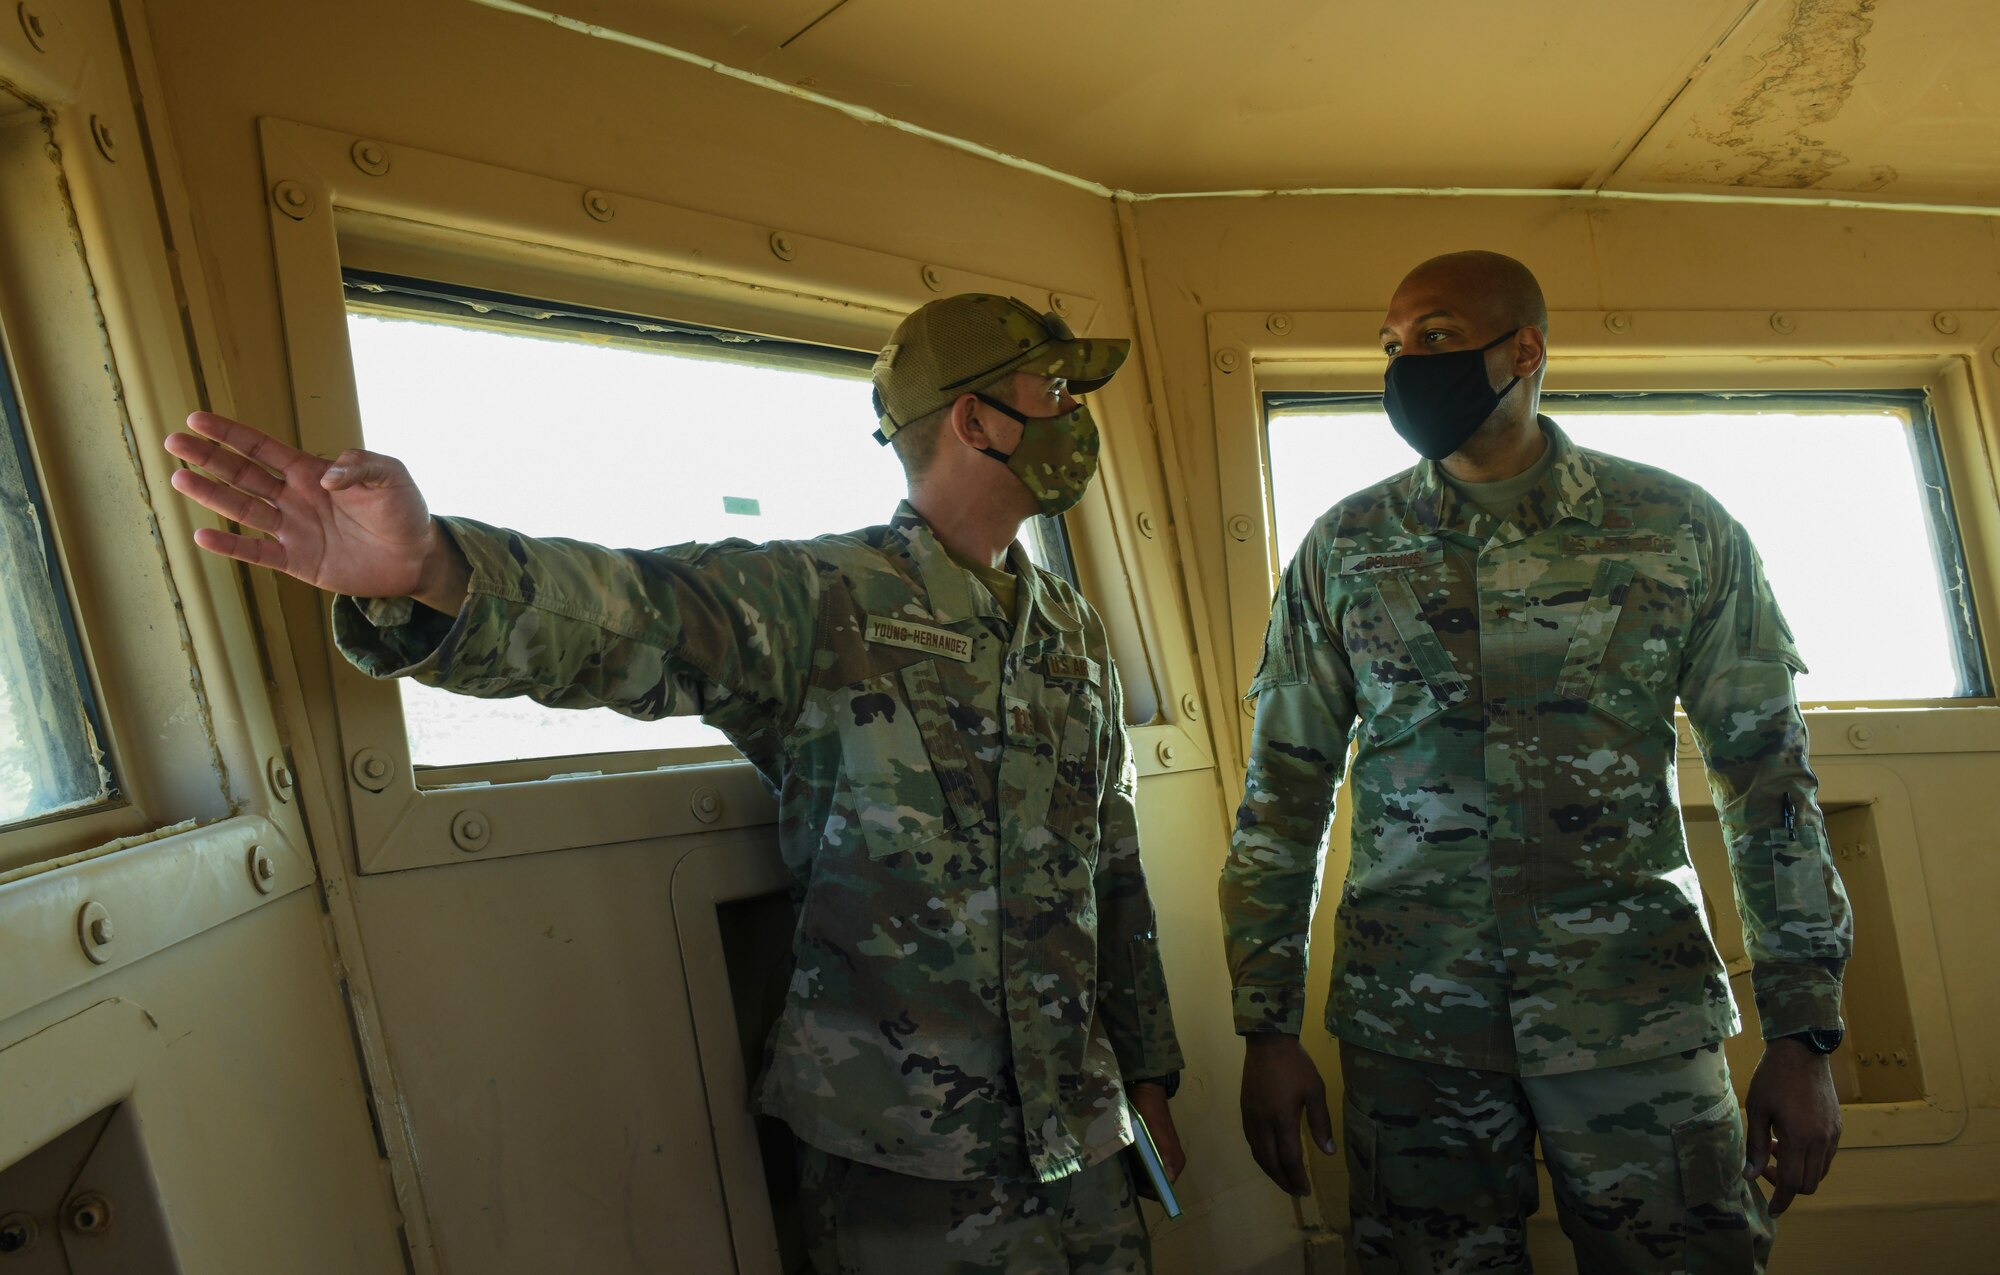 U.S. Air Force Brig. Gen. Roy W. Collins, Headquarters U.S. Air Force director of security forces and deputy chief of staff for logistics, engineering and force protection, receives a tour of a look-out tower from Capt. Malcolm Young-Hernandez, 409th Expeditionary Security Forces Squadron operations officer, during a visit to Nigerien Air Base 201, Agadez, Niger, Feb. 6, 2021. The visit focused on security forces, force protection elements across all U.S. Africa Command locations, to include on-going civil engineering projects that relate to or enhance force protection at each location. (U.S. Air Force photo by Senior Airman Gabrielle Winn)